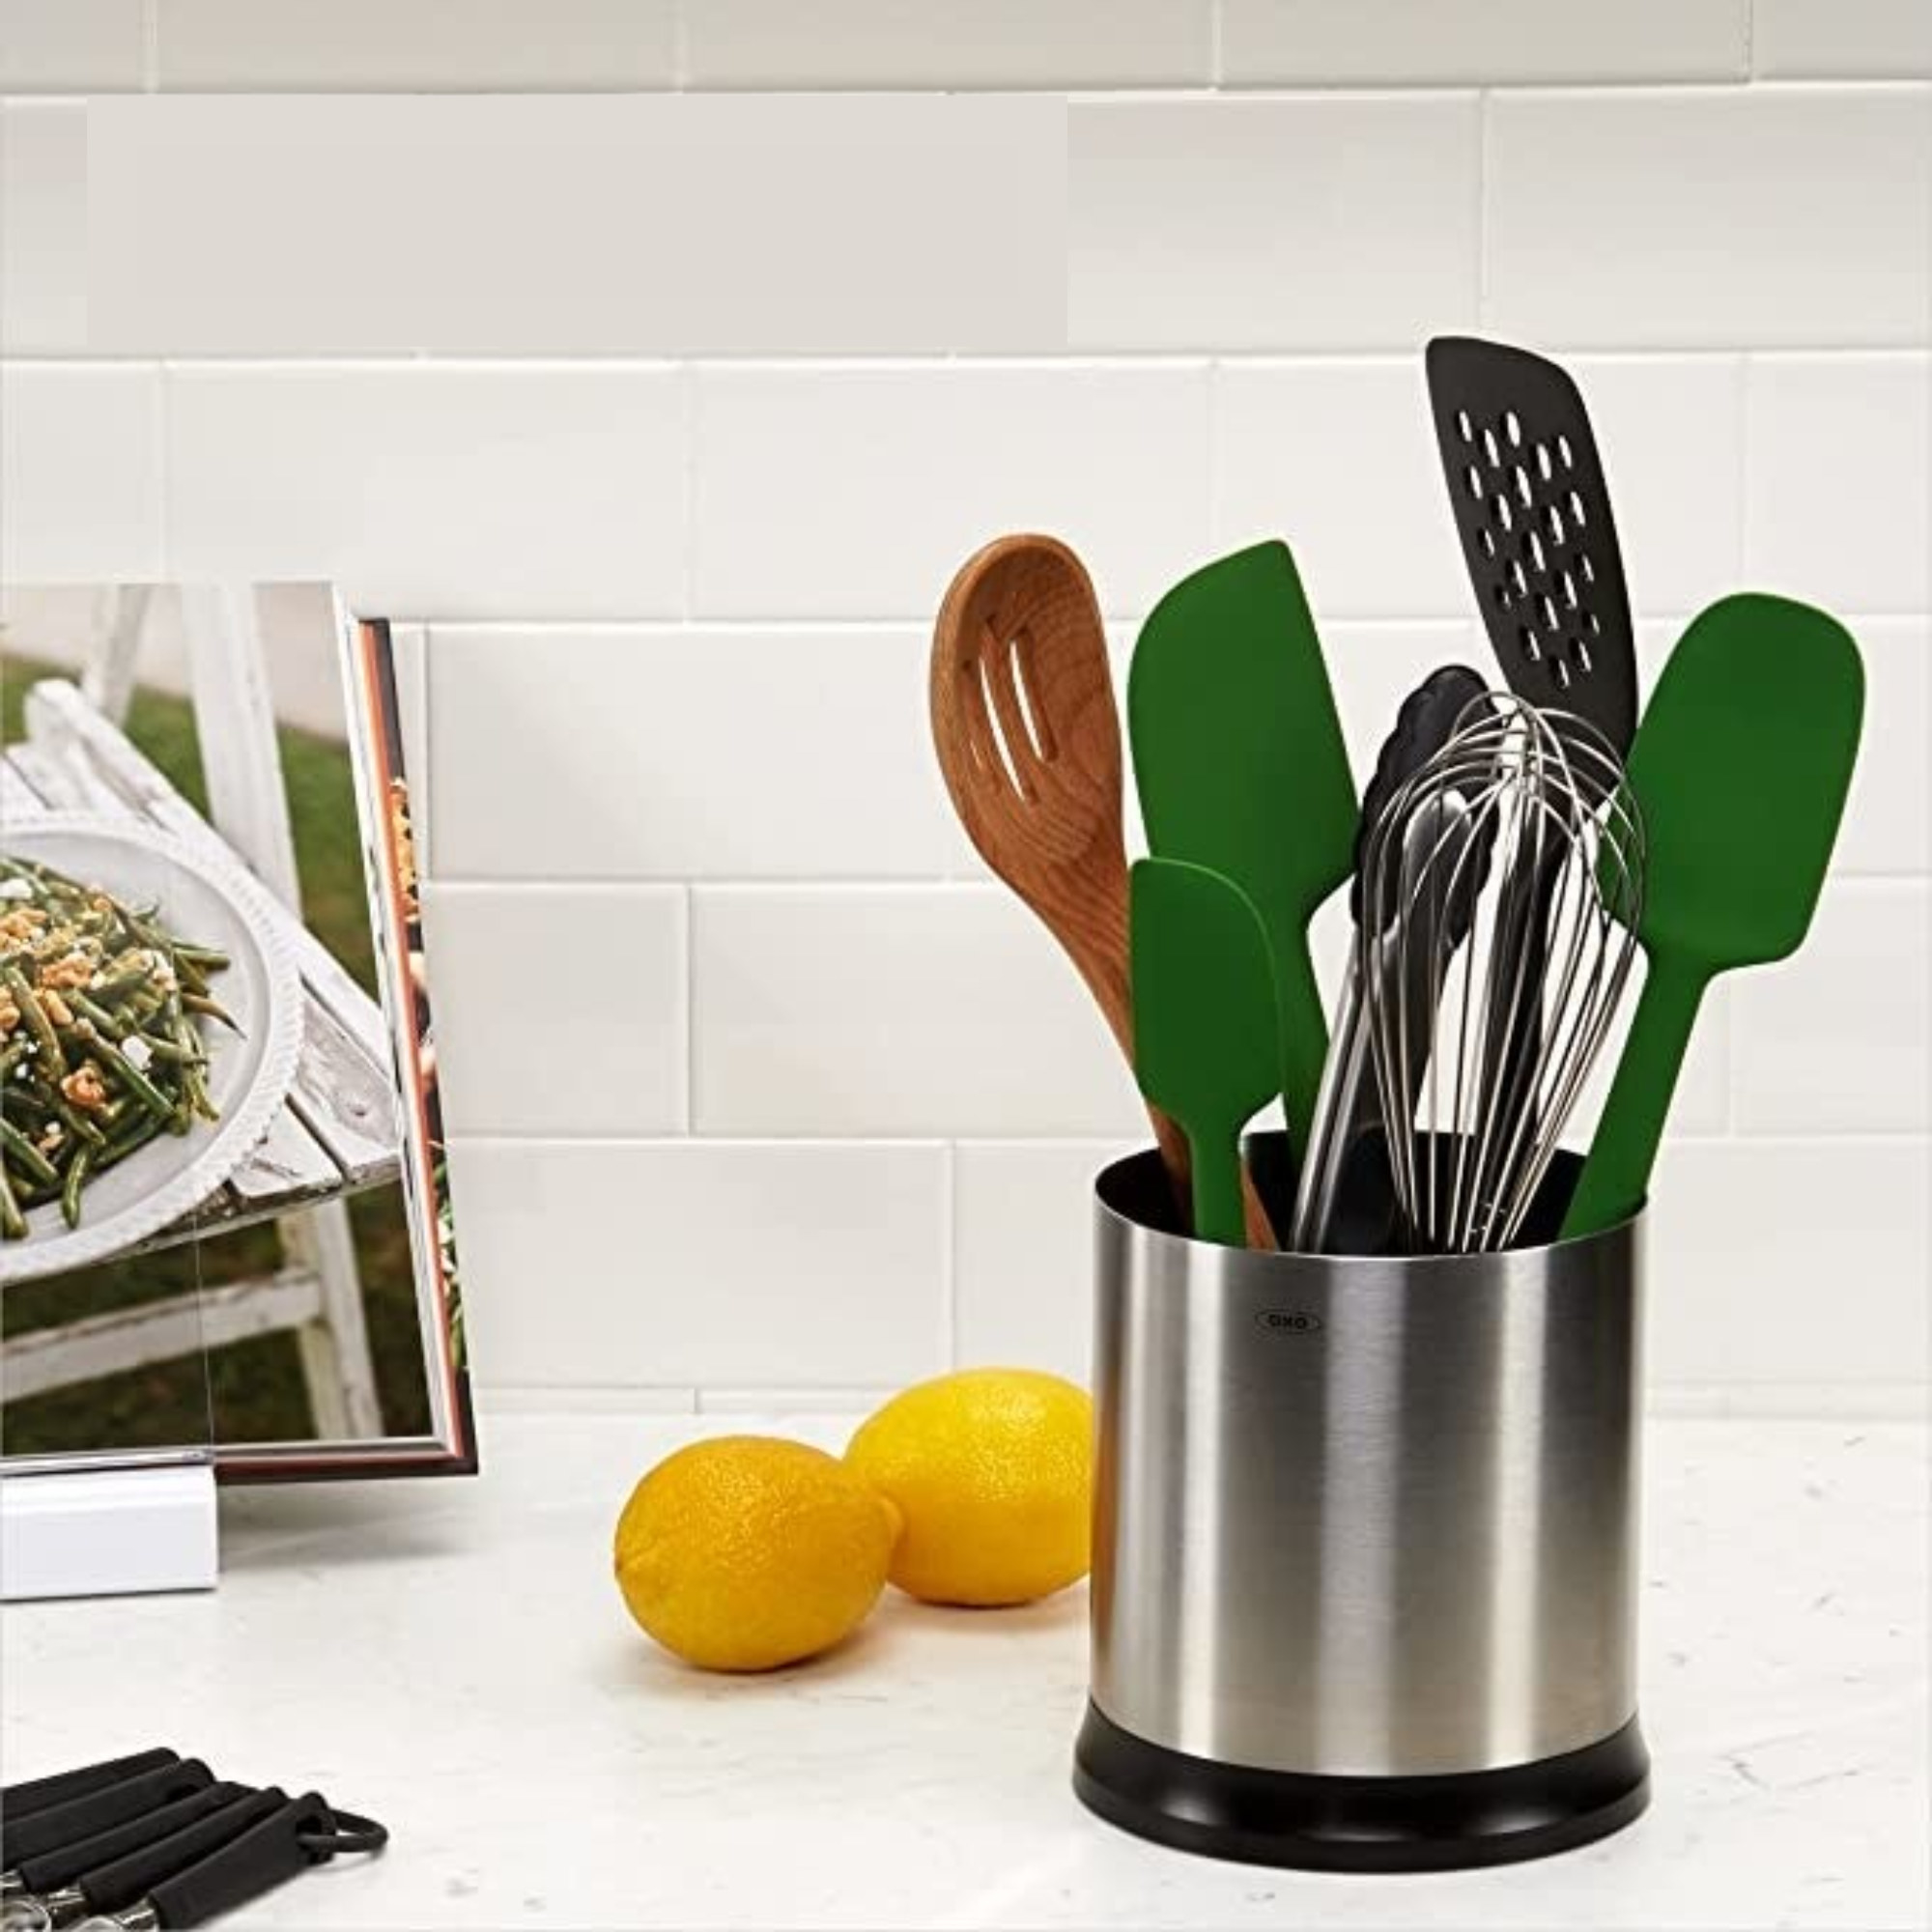 The utensil holder in stainless steel with a rubber bottom